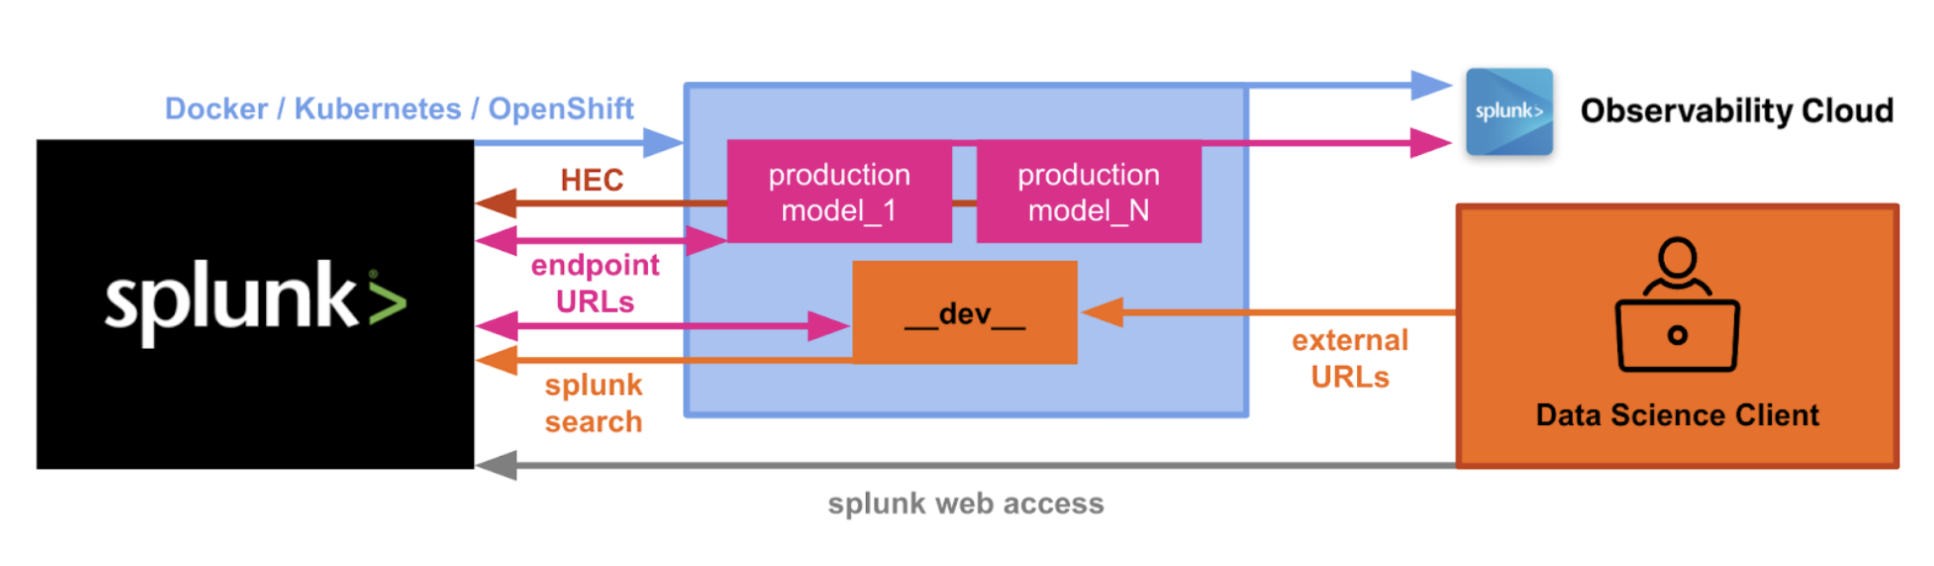 This image represents how DSDL connects to the Splunk platform. In this diagram, the Splunk platform is represented on the far left in the black box. The container environment is represented in the centre of the diagram in the light blue box. The Splunk Observability Suite is represented in a labeled box in the top right of the diagram..